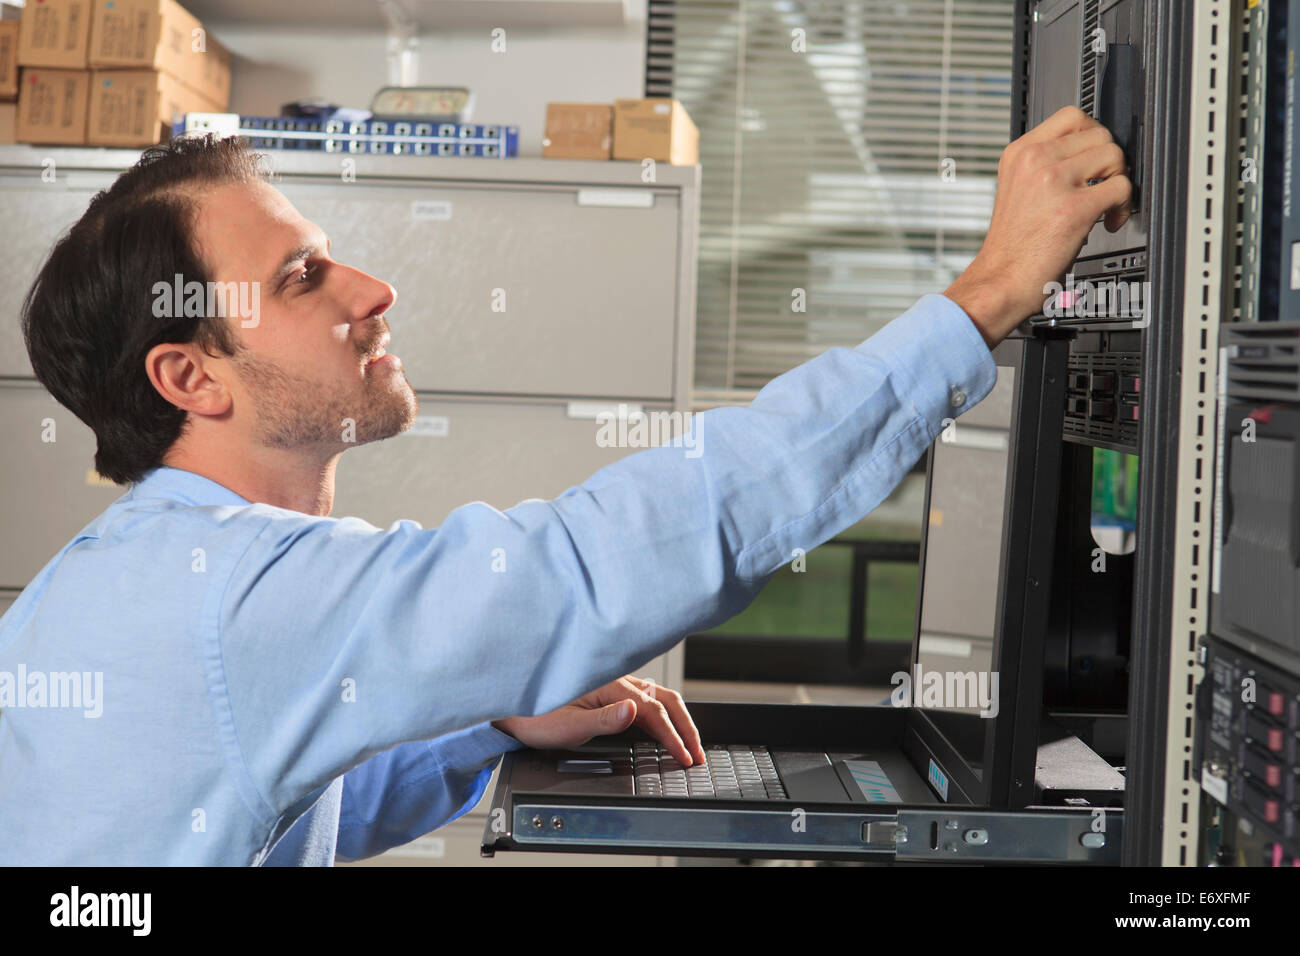 Network engineer working on computer in data center Stock Photo